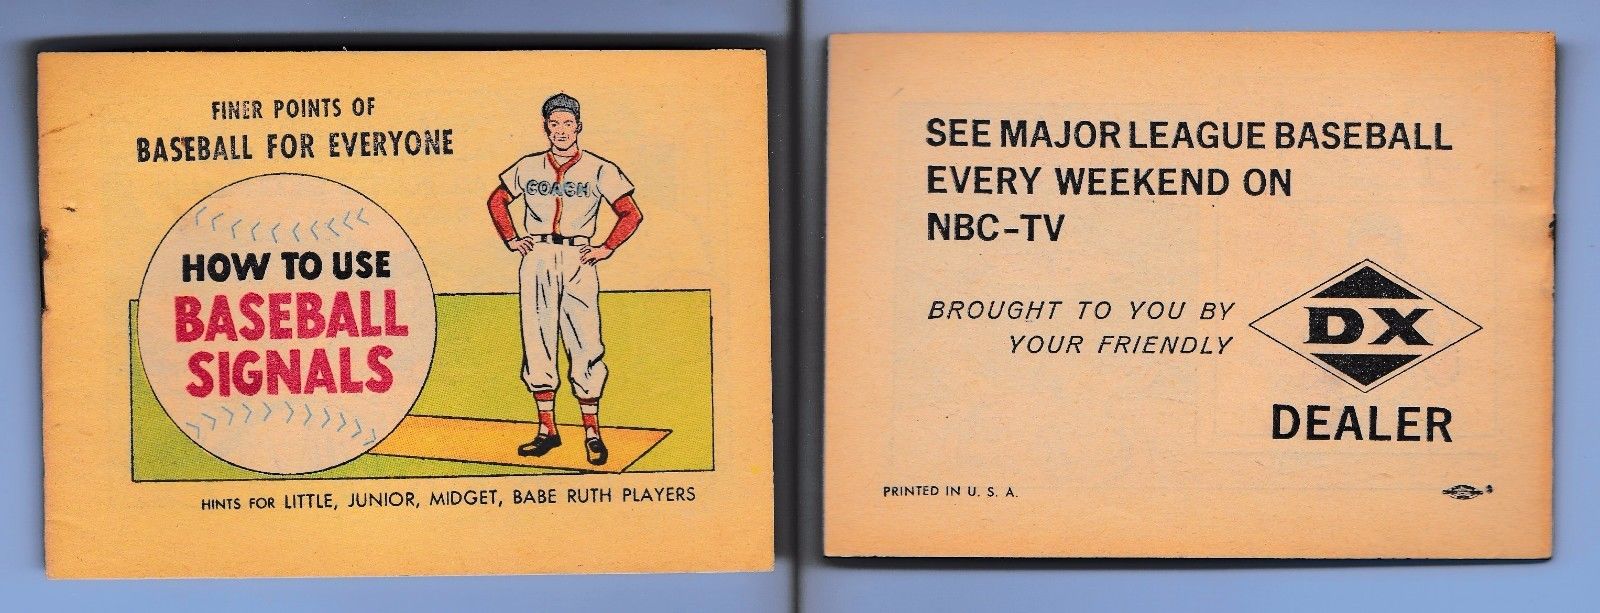 1962 How To Use Baseball Signals Nbc Tvdx Dealer Booklet 16 Pages 